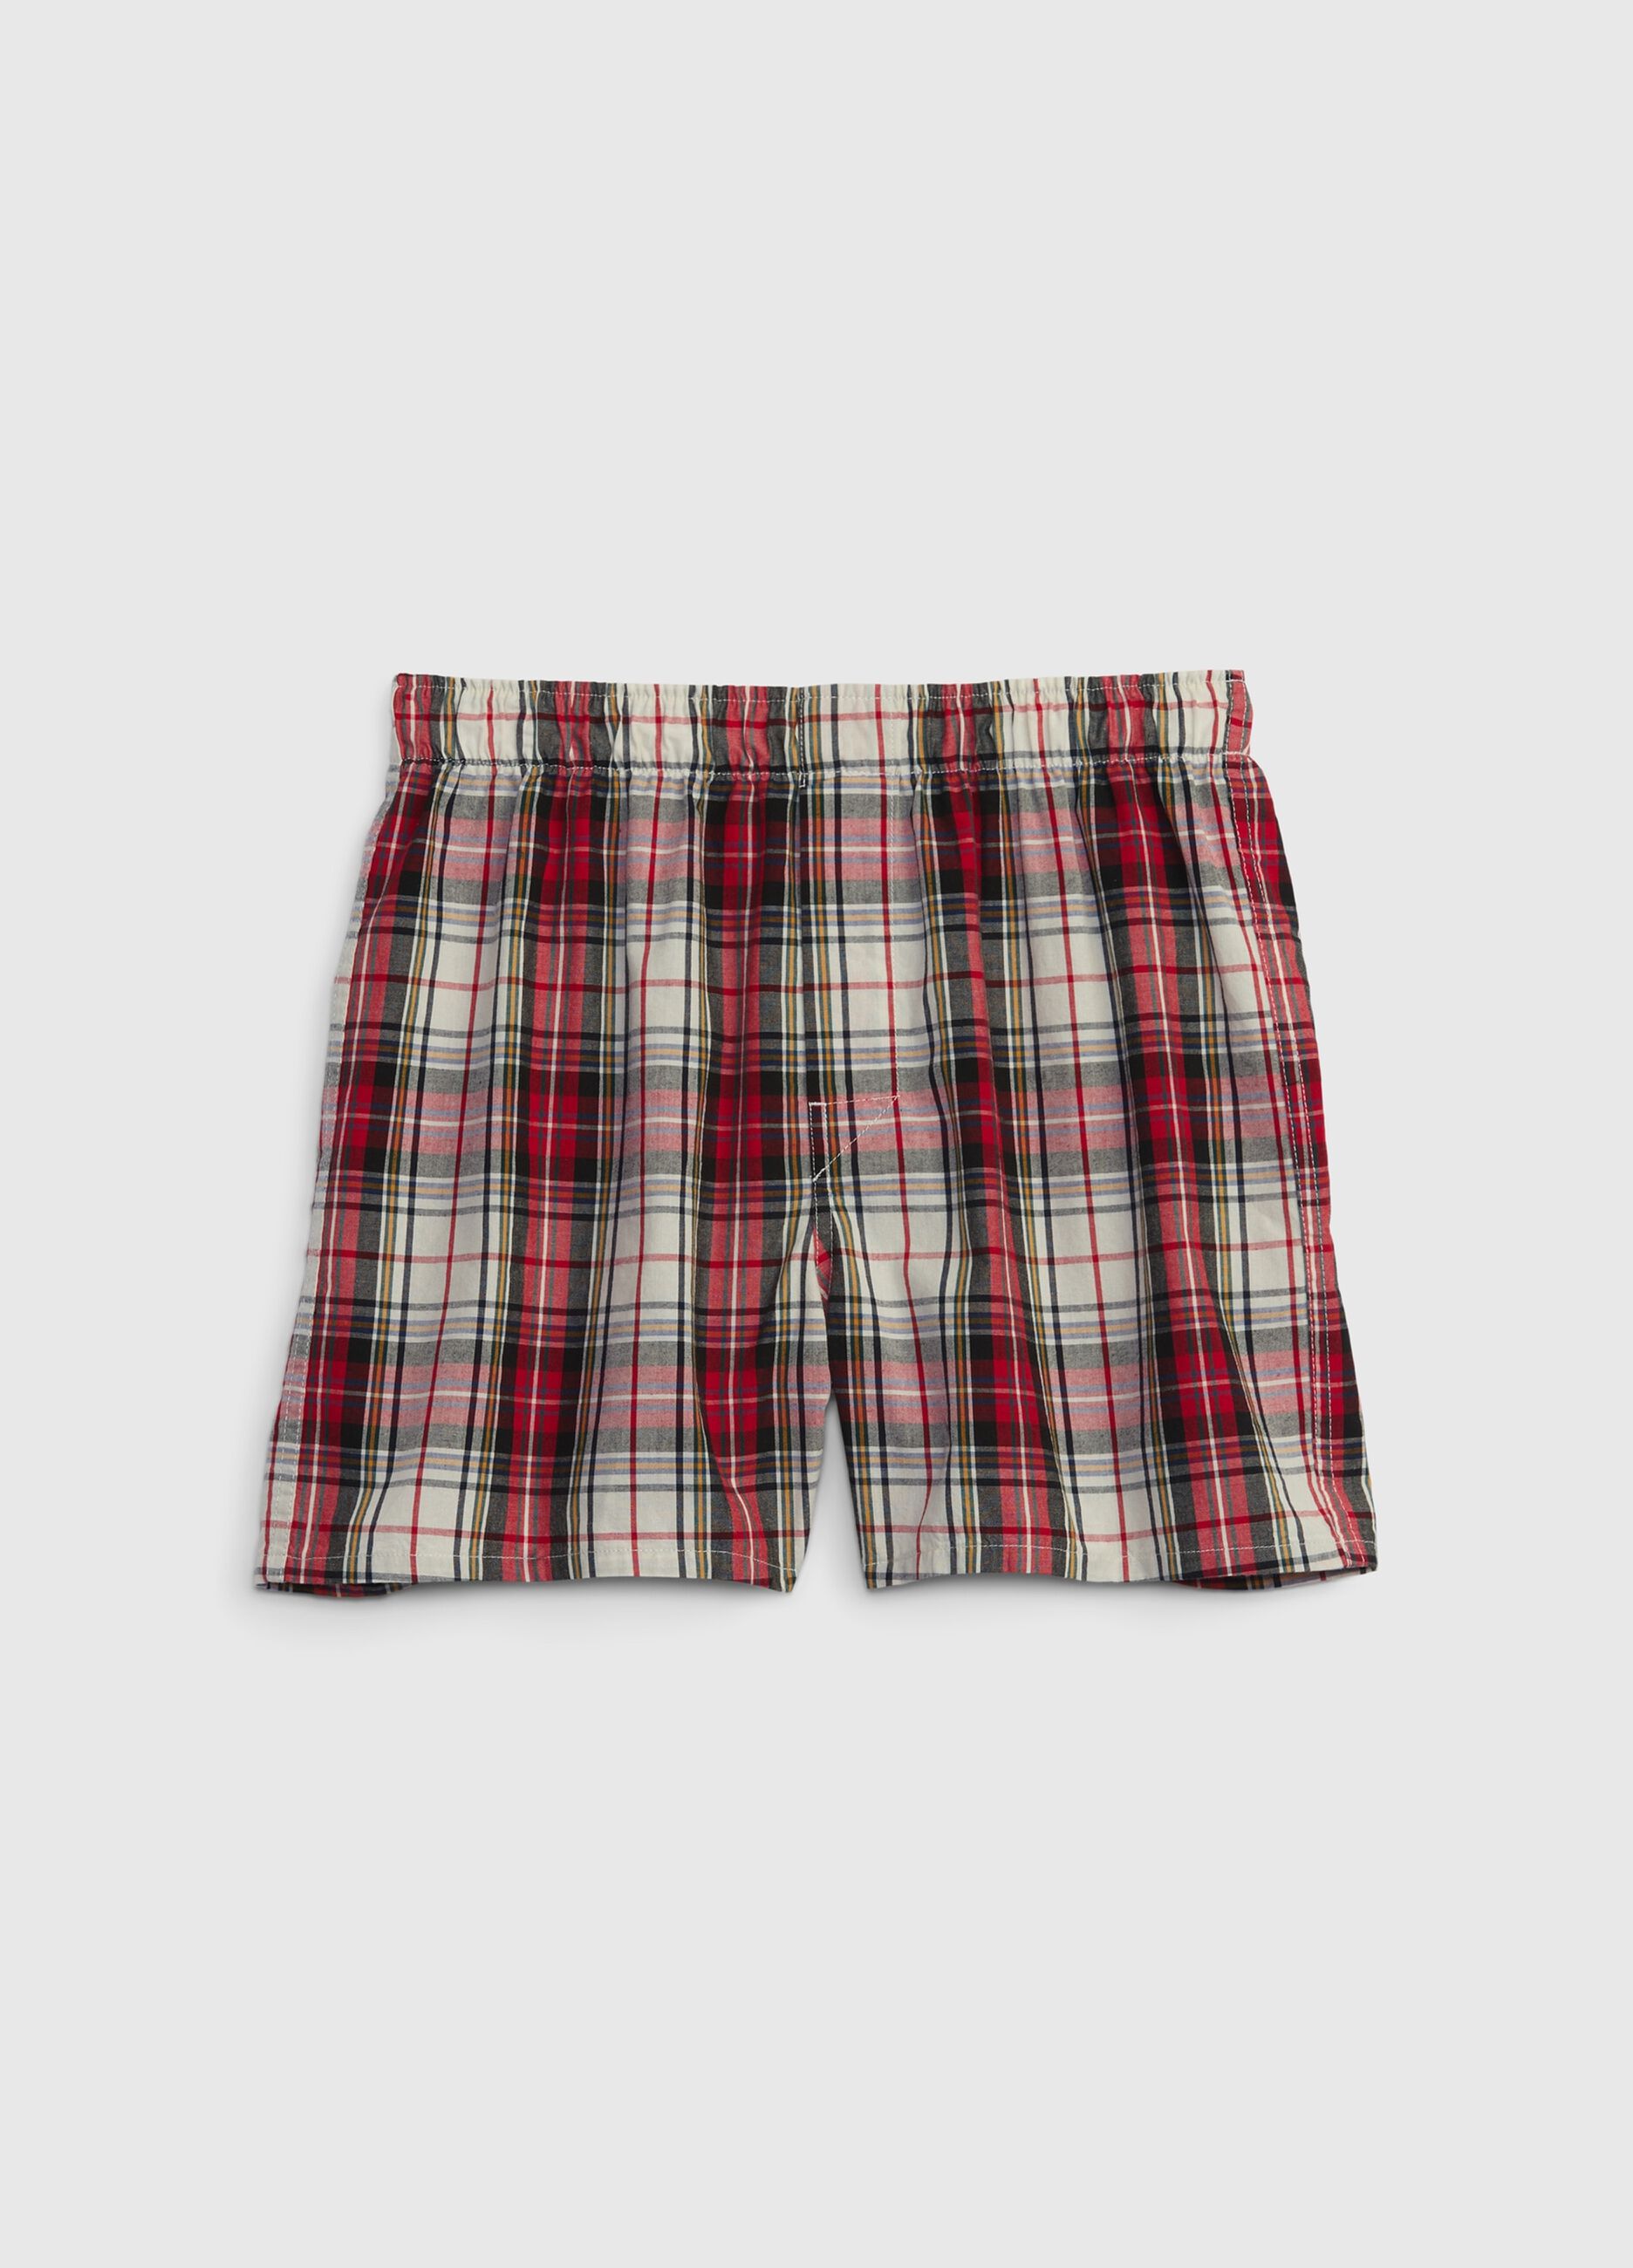 Cotton boxer shorts with check pattern